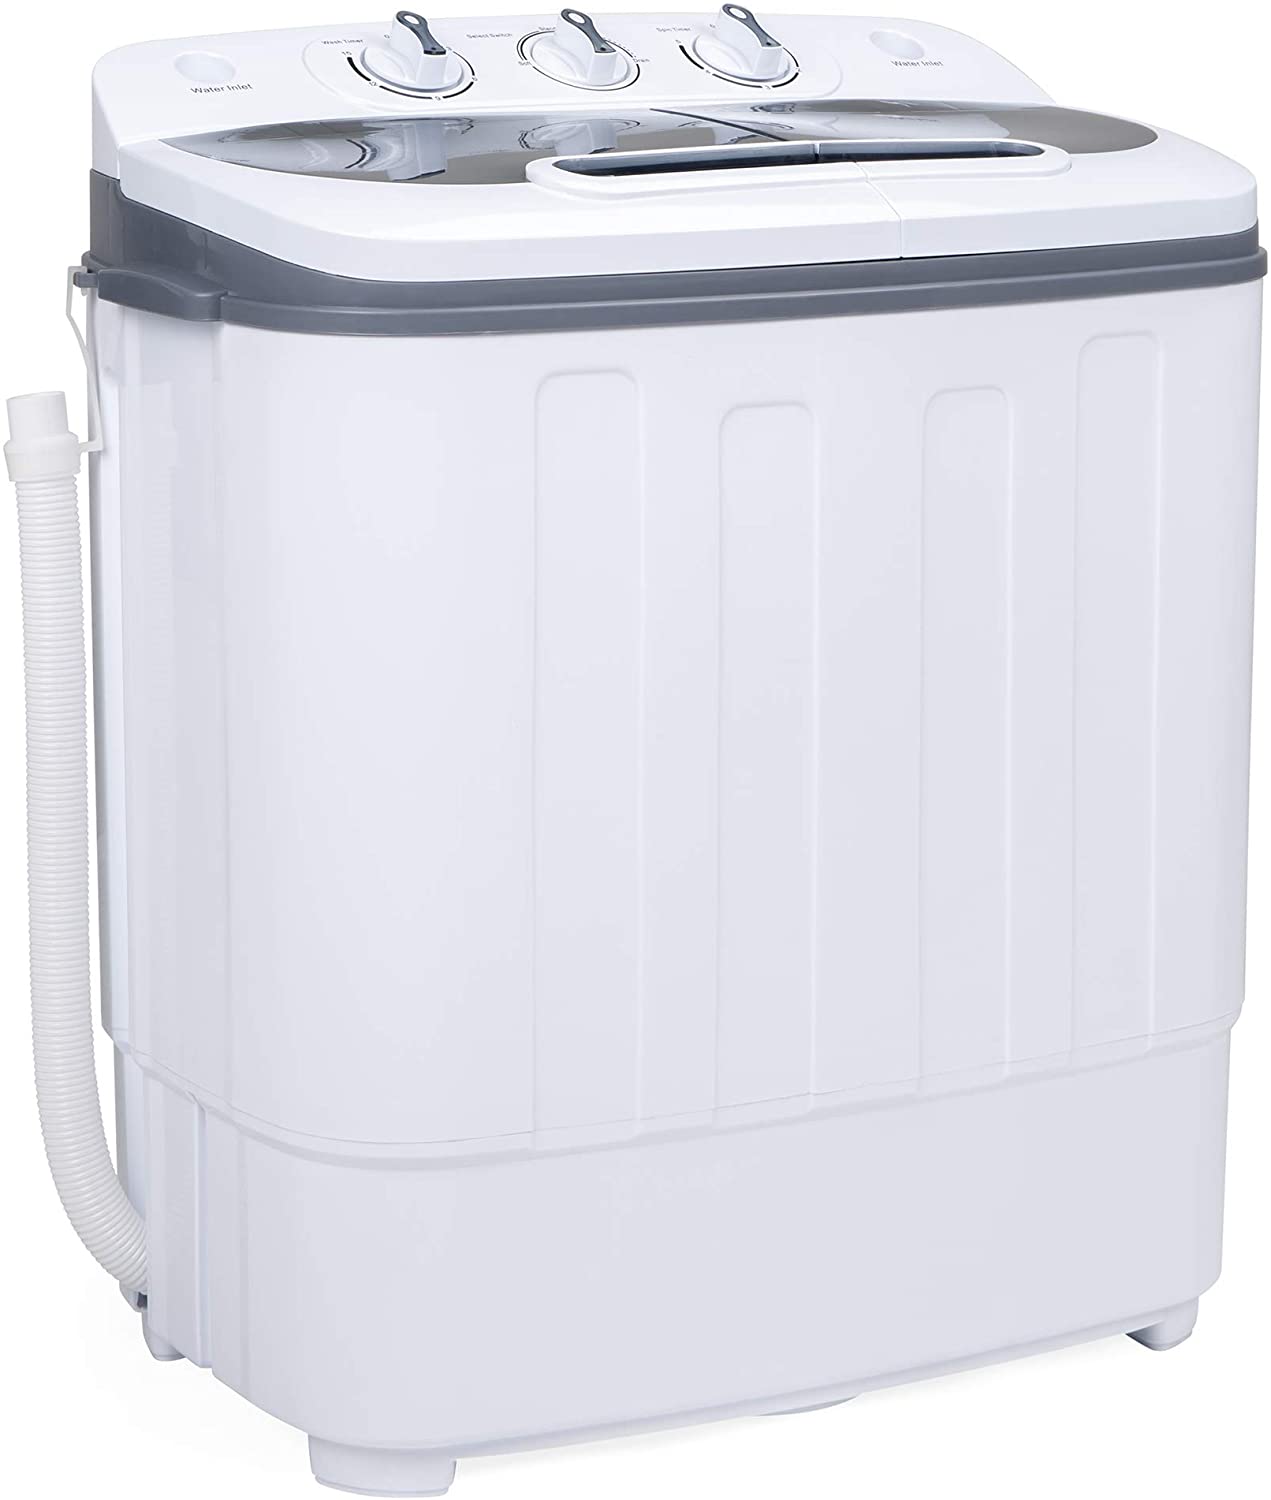 Best Washing Machine for Apartments